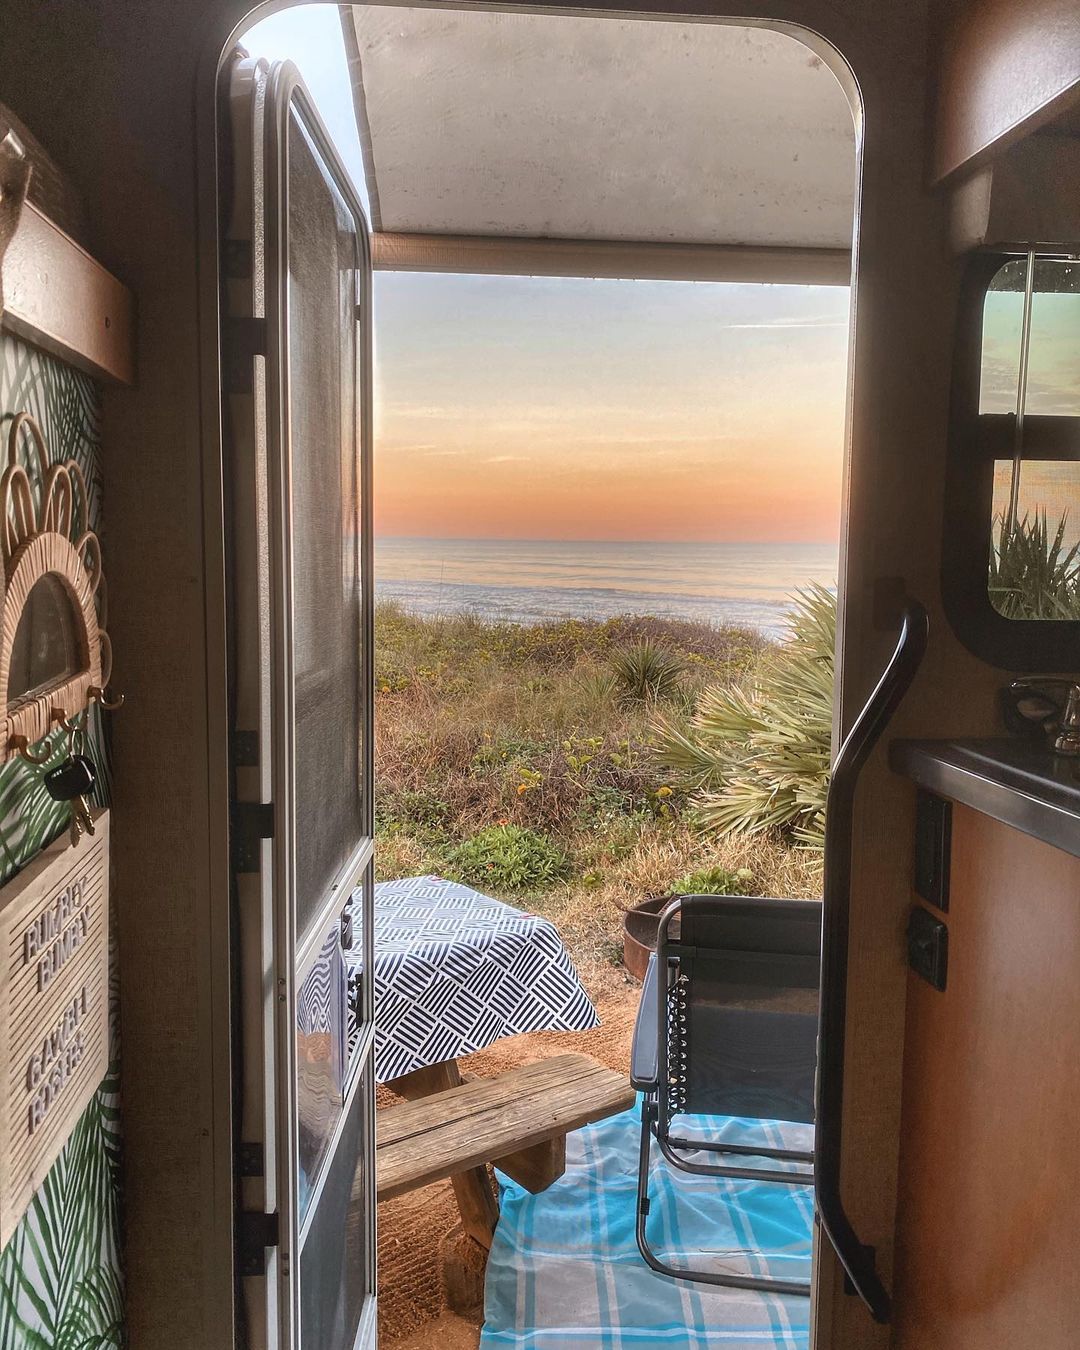 View of the Beach Looking out of the Door on an RV. Photo by Instagram user @rumbly_bumbly_rv